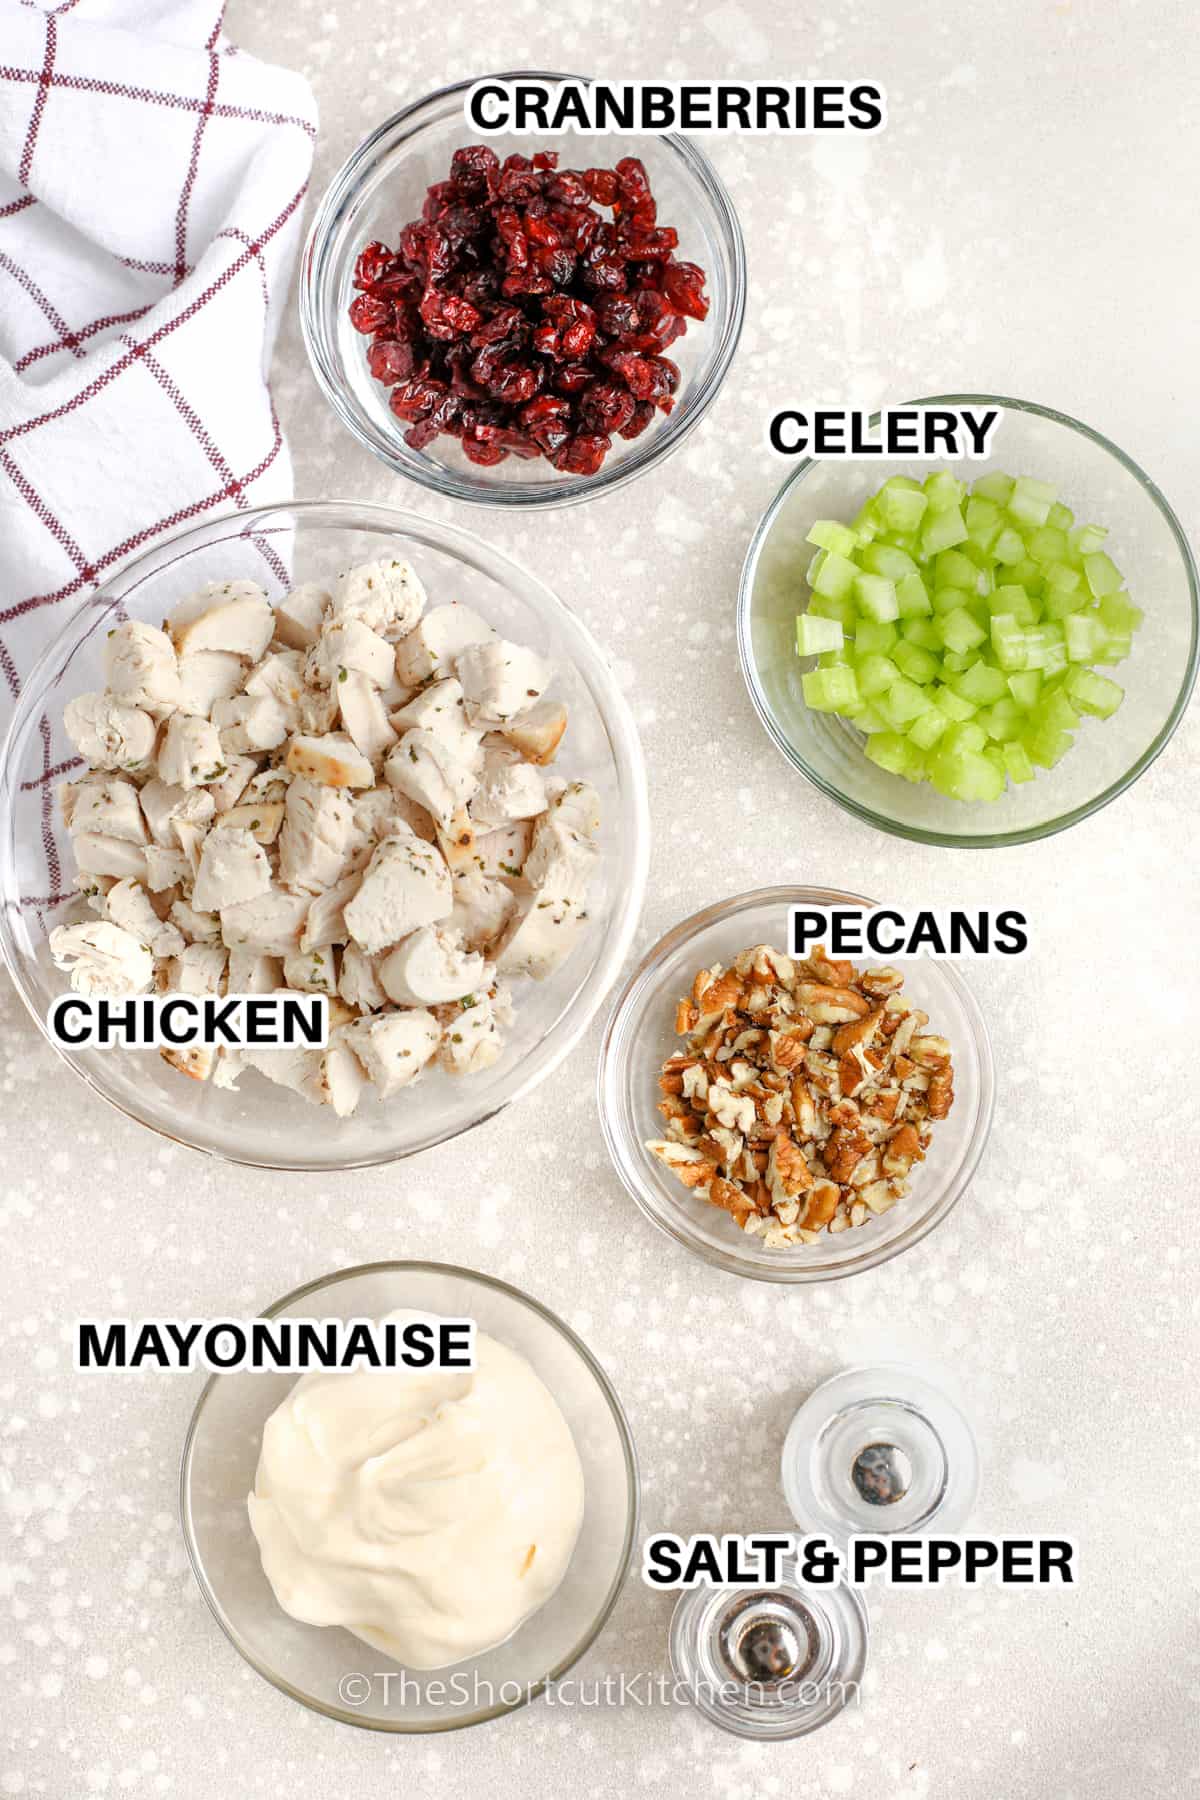 labeled ingredients to make cranberry chicken salad